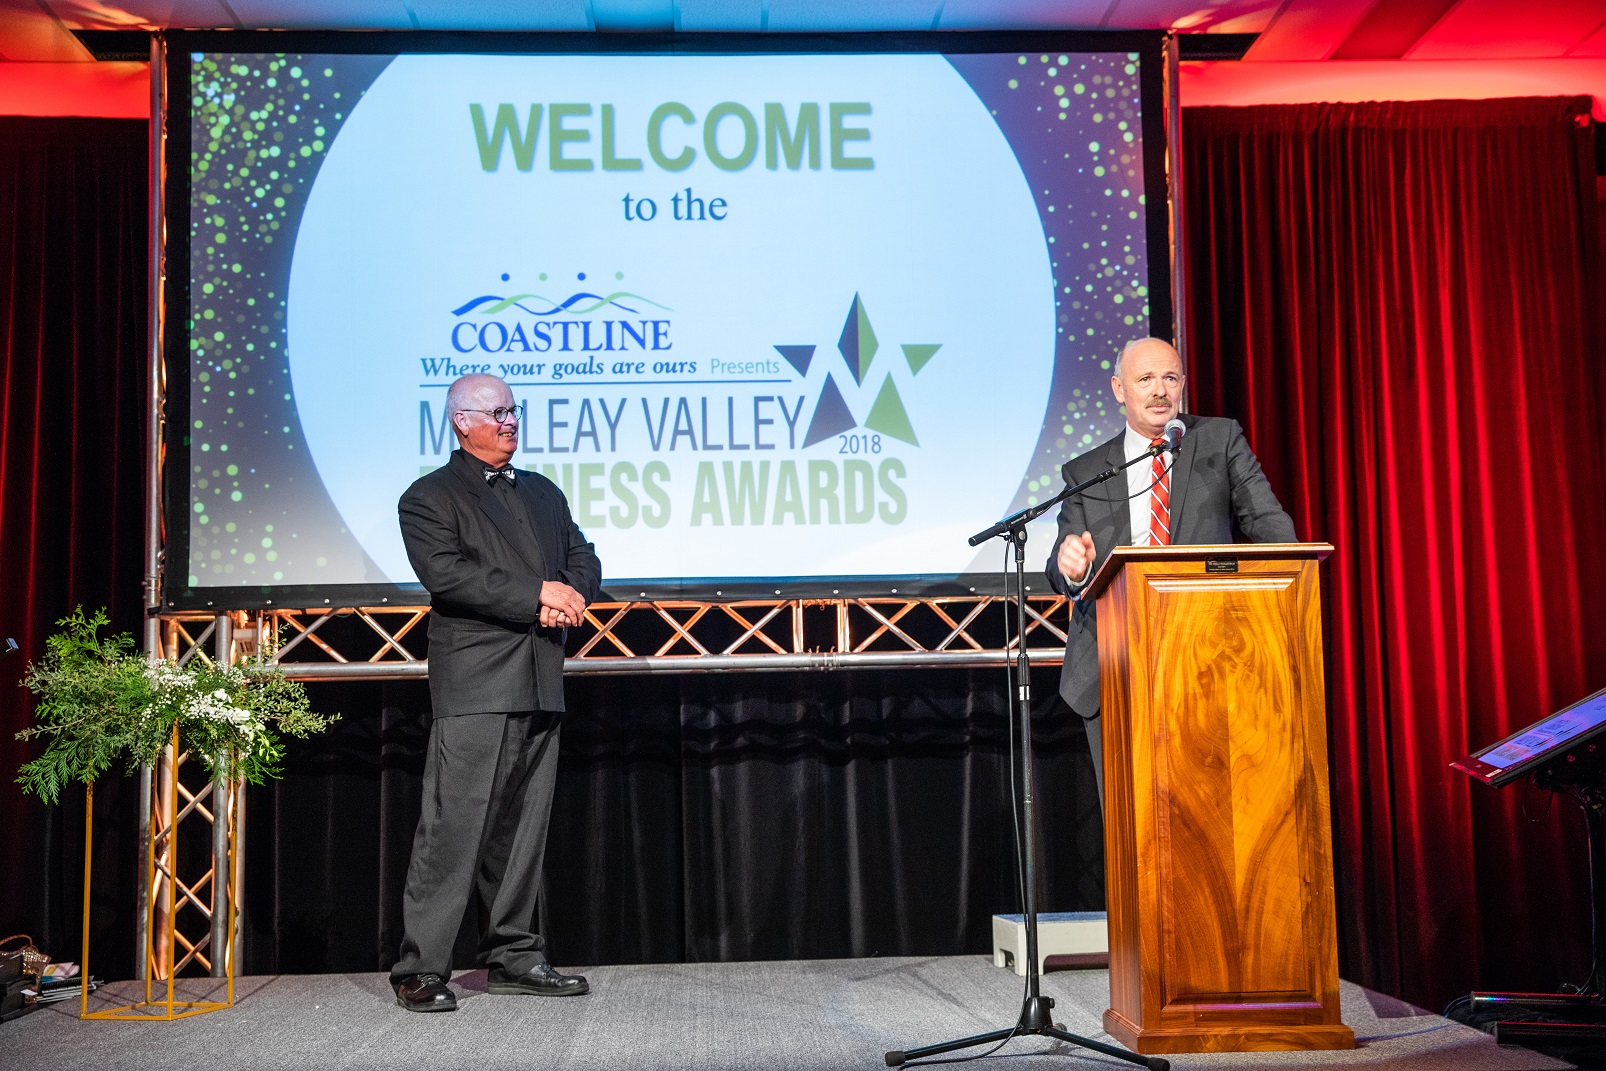 Nominate your business for the 2019 Macleay Valley Business Awards!